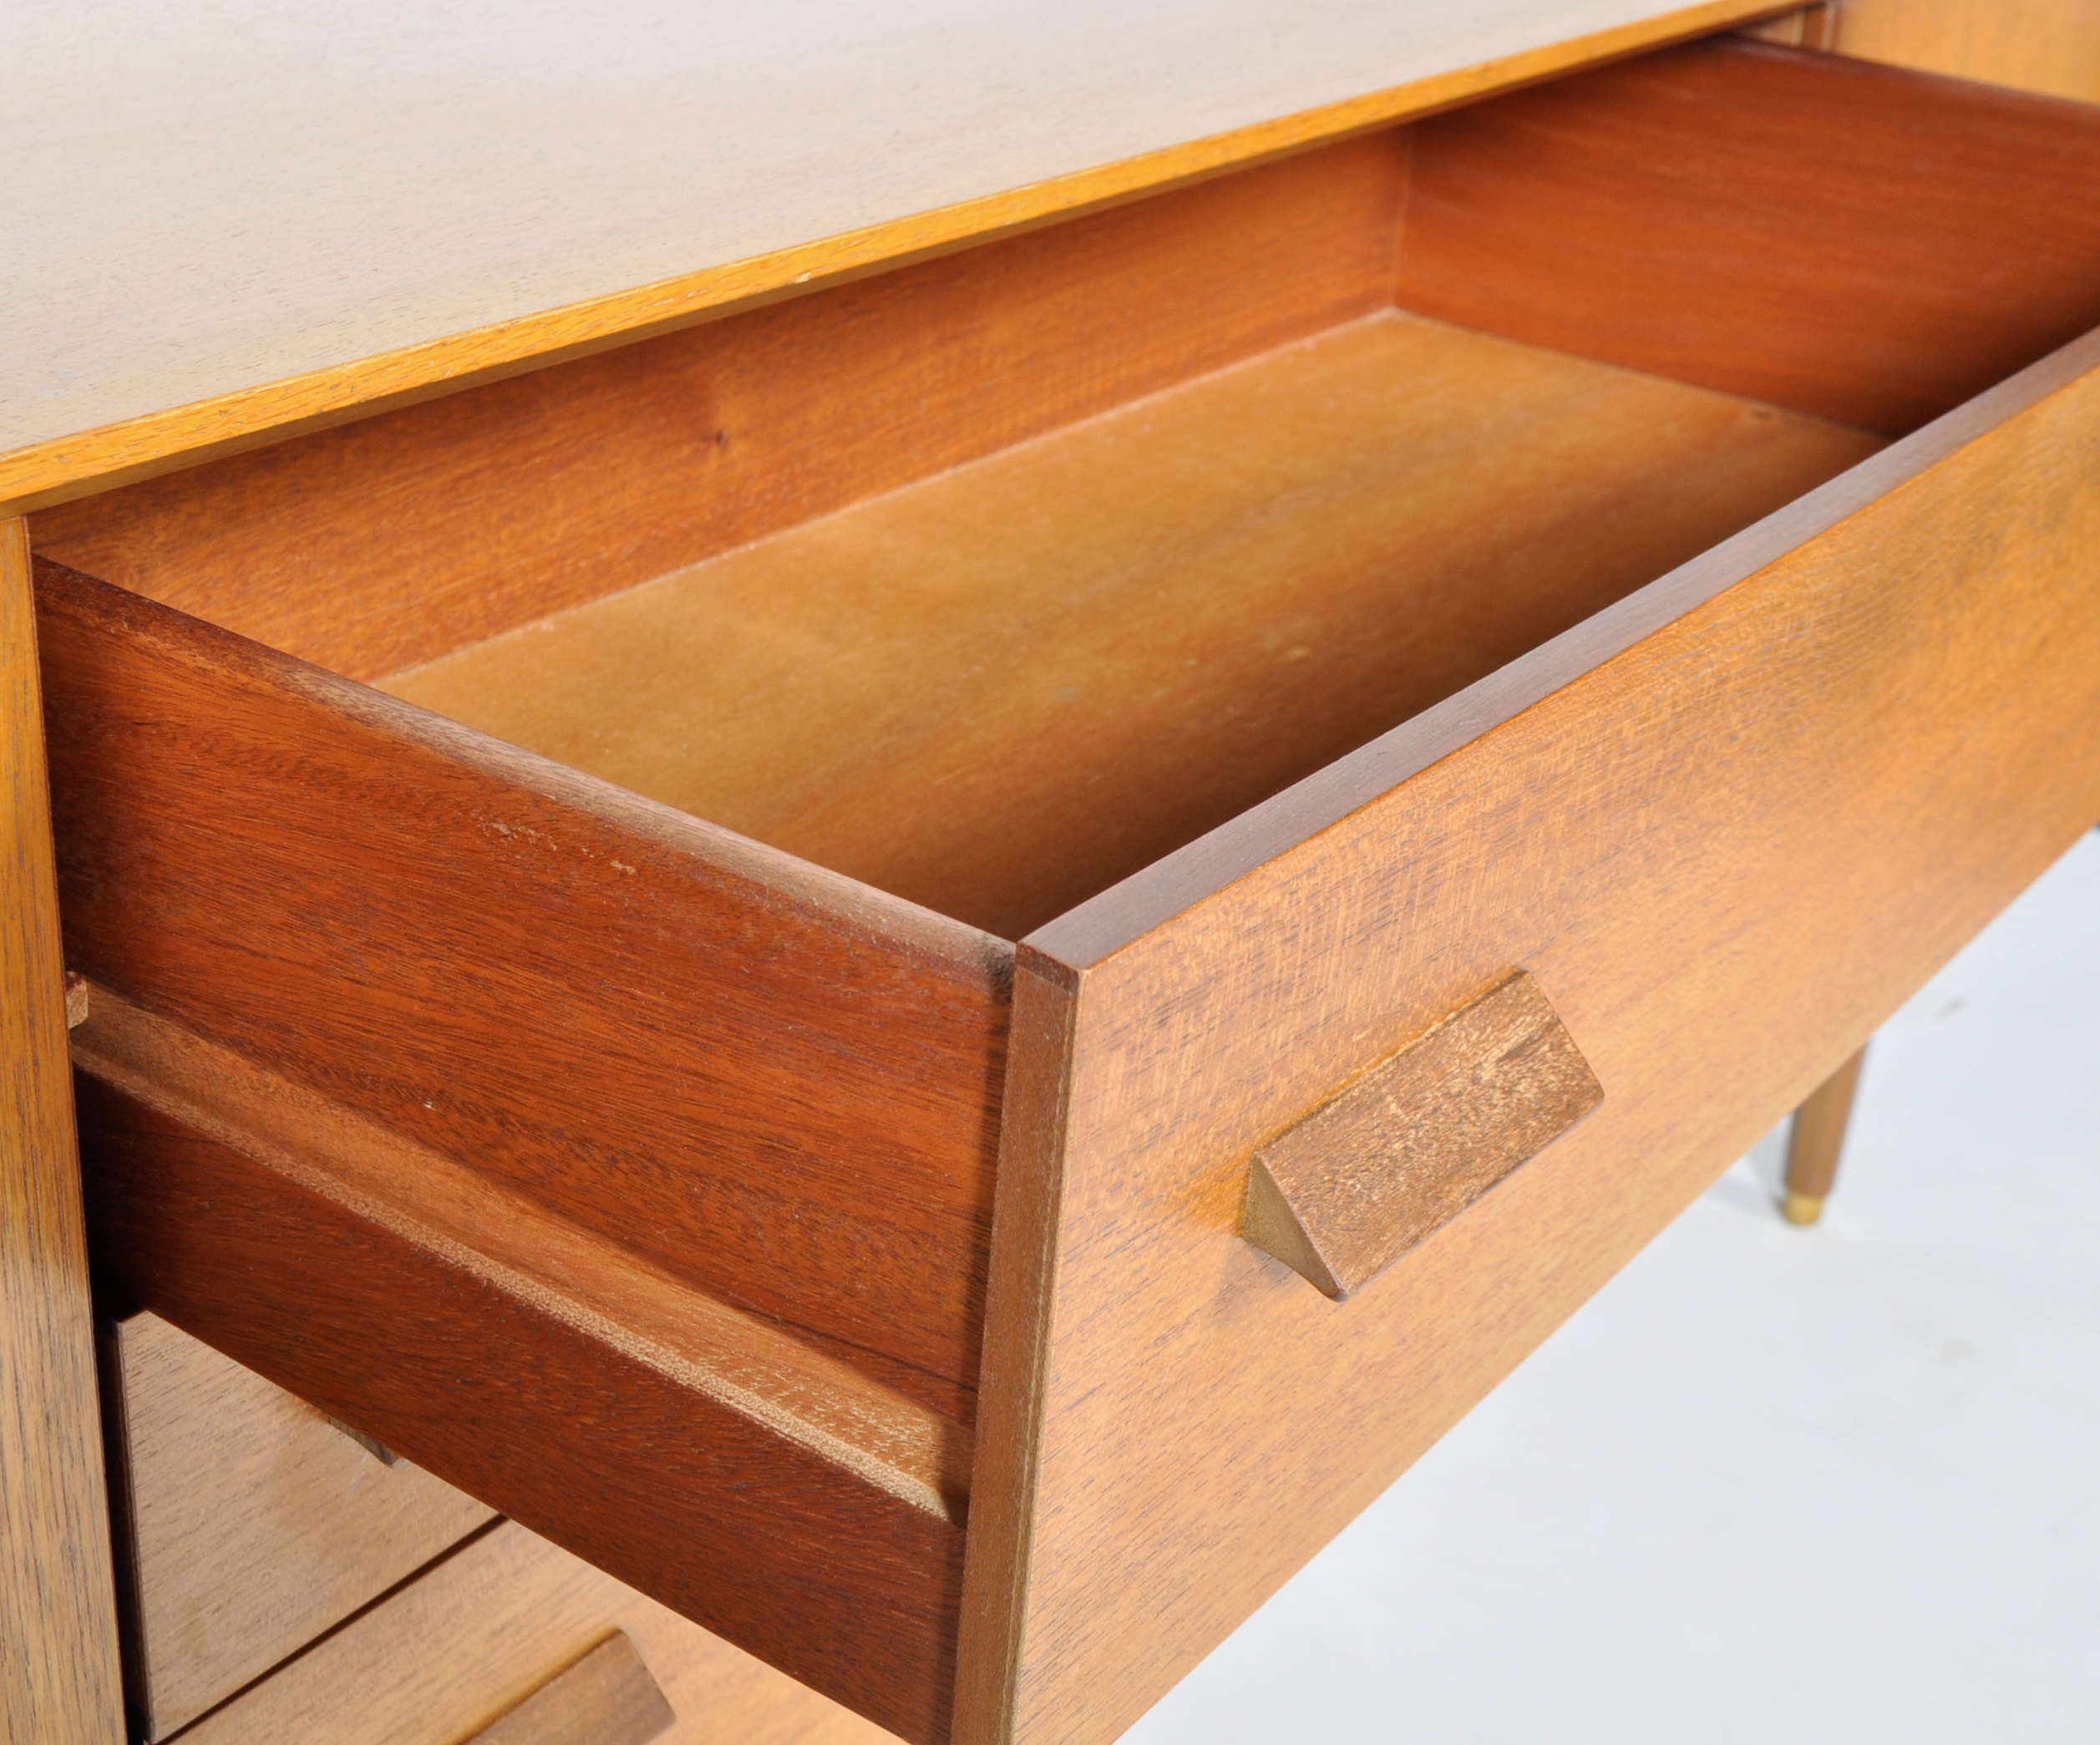 RICHARD YOUNG FOR G PLAN - MID CENTURY TEAK SIDEBOARD - Image 4 of 6